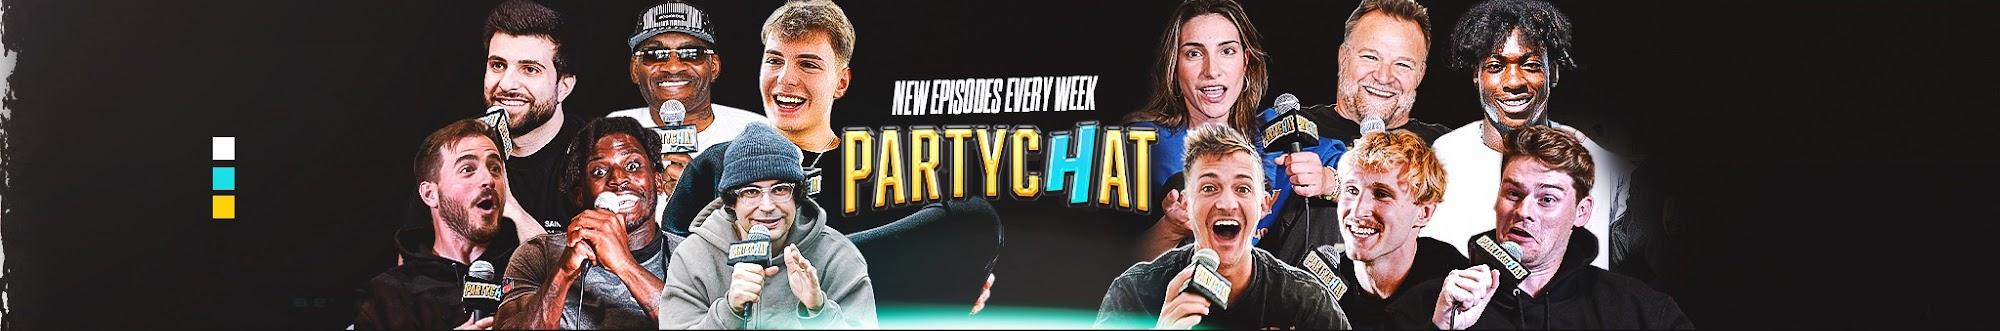 PARTYCHAT